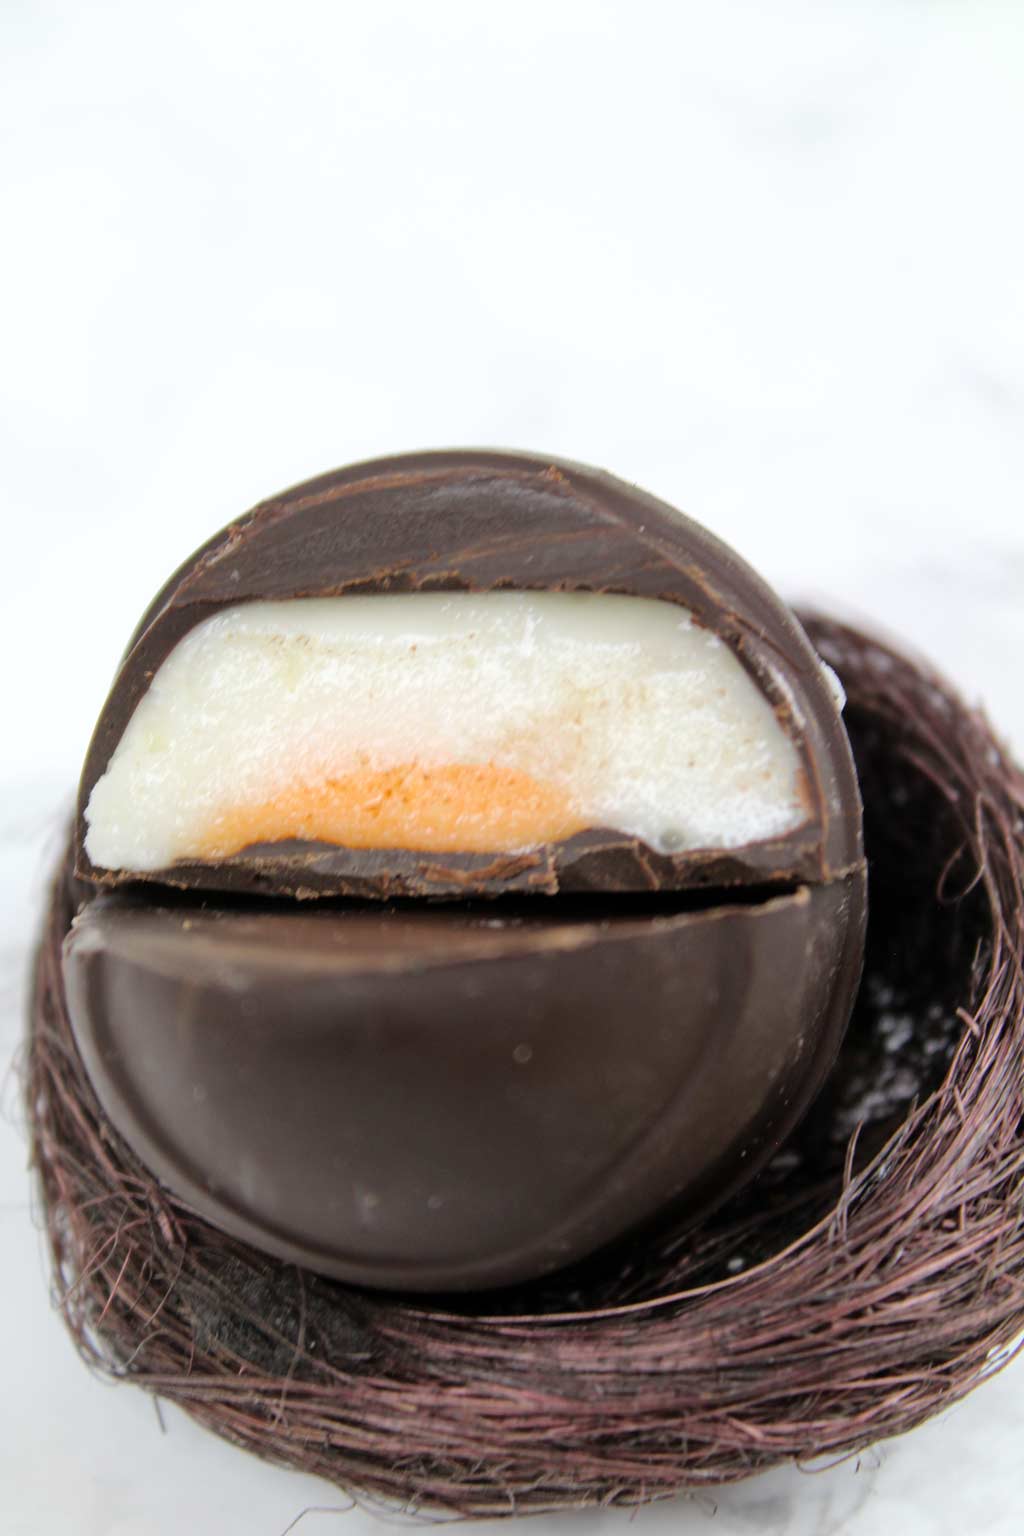 vegan creme egg in a small basket